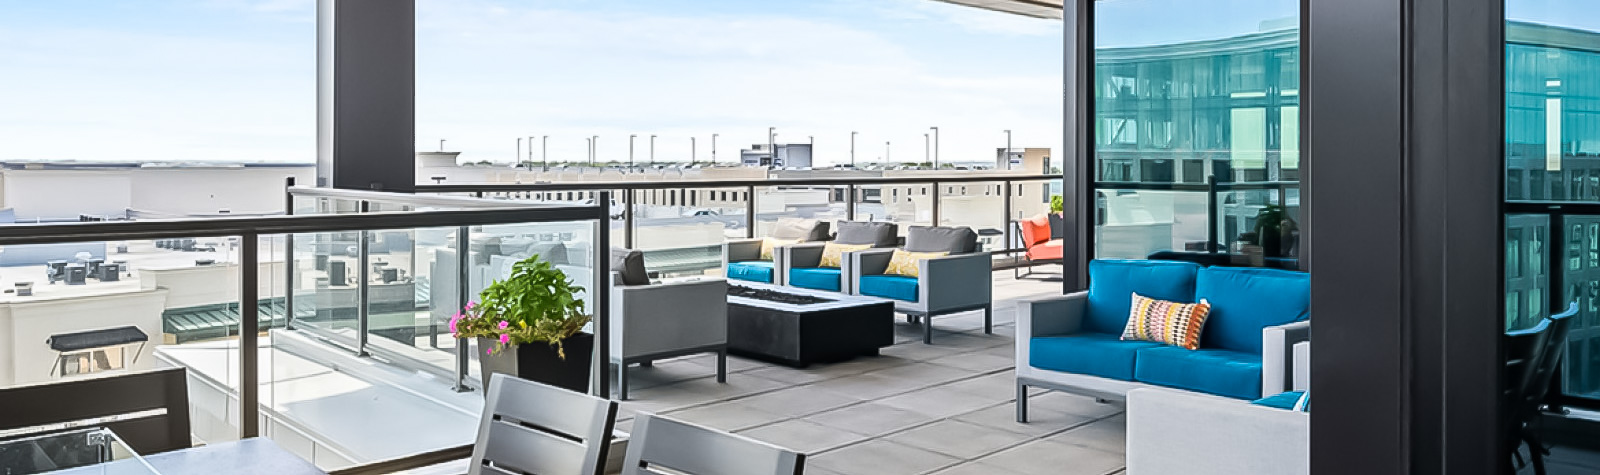 Community Terrace Lounge at The District Flats